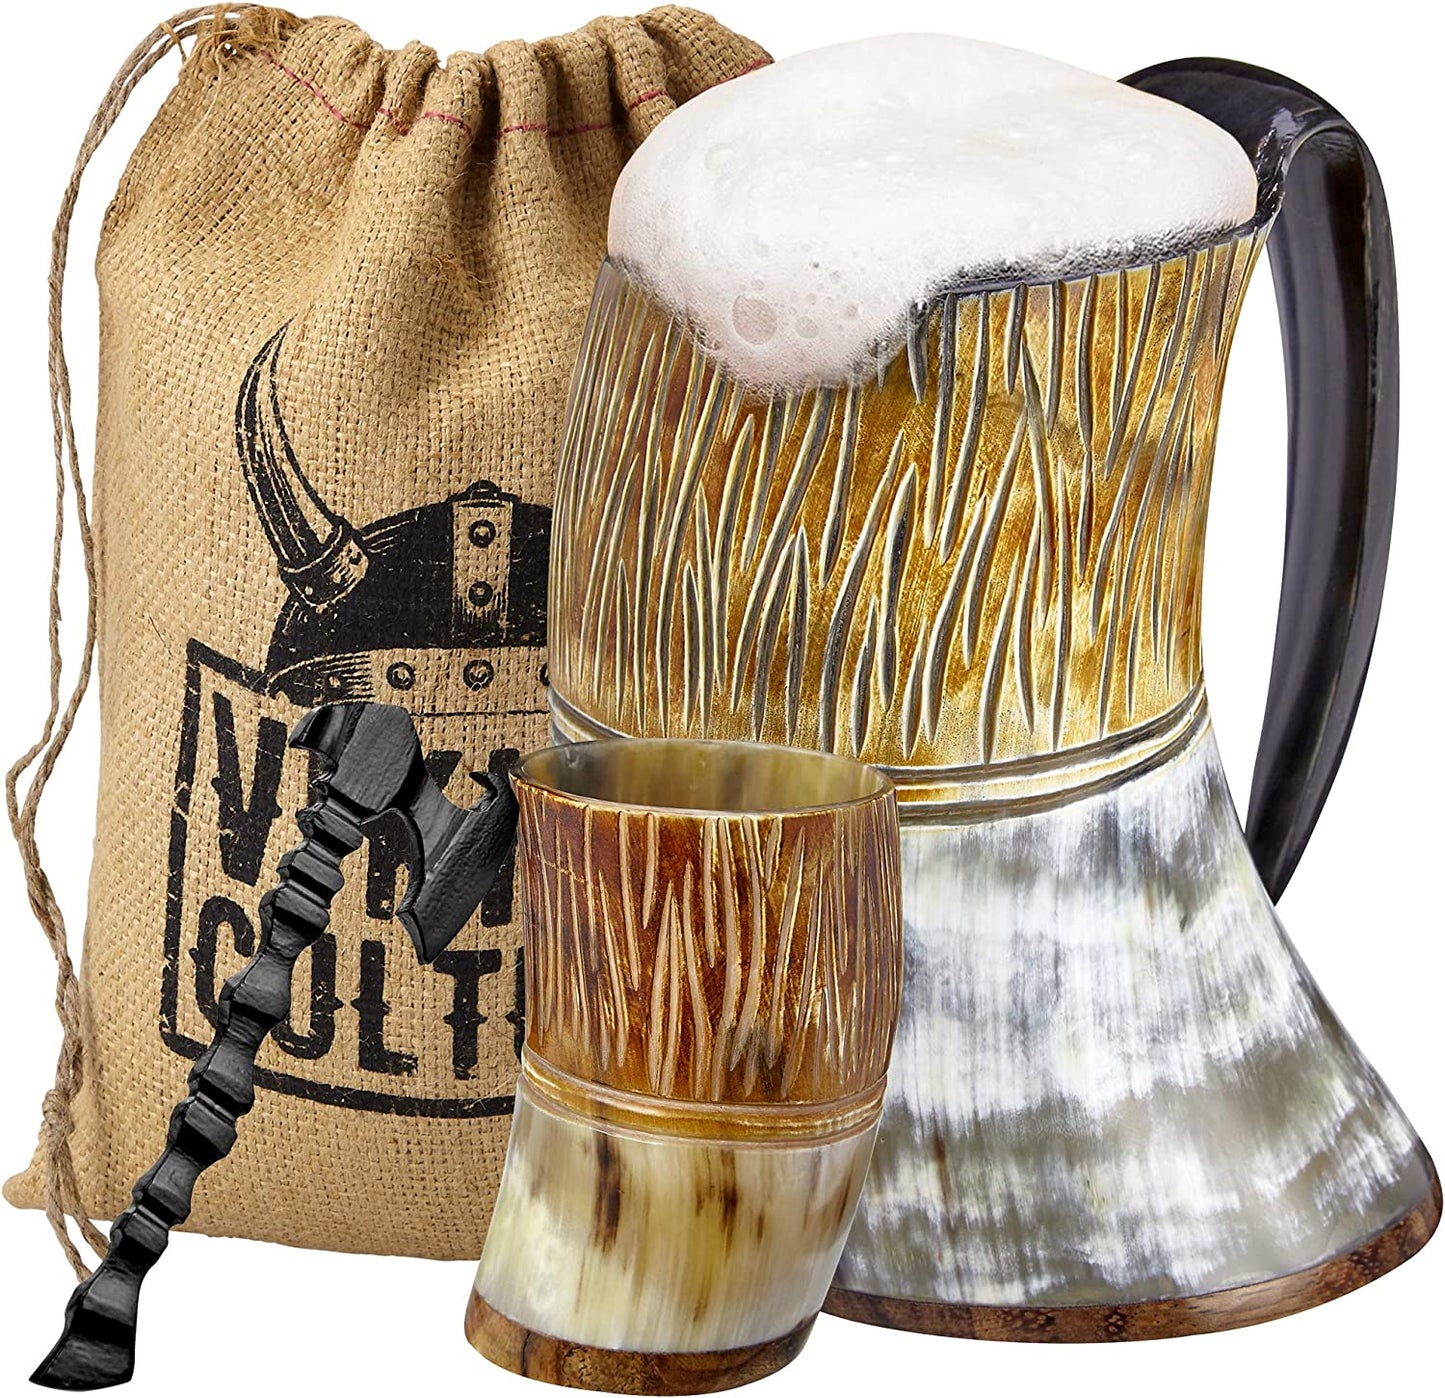 A Viking beer mug set which includes an ox horn mug, shot glass, axe shaped bottle opener and a brown drawstring bag.